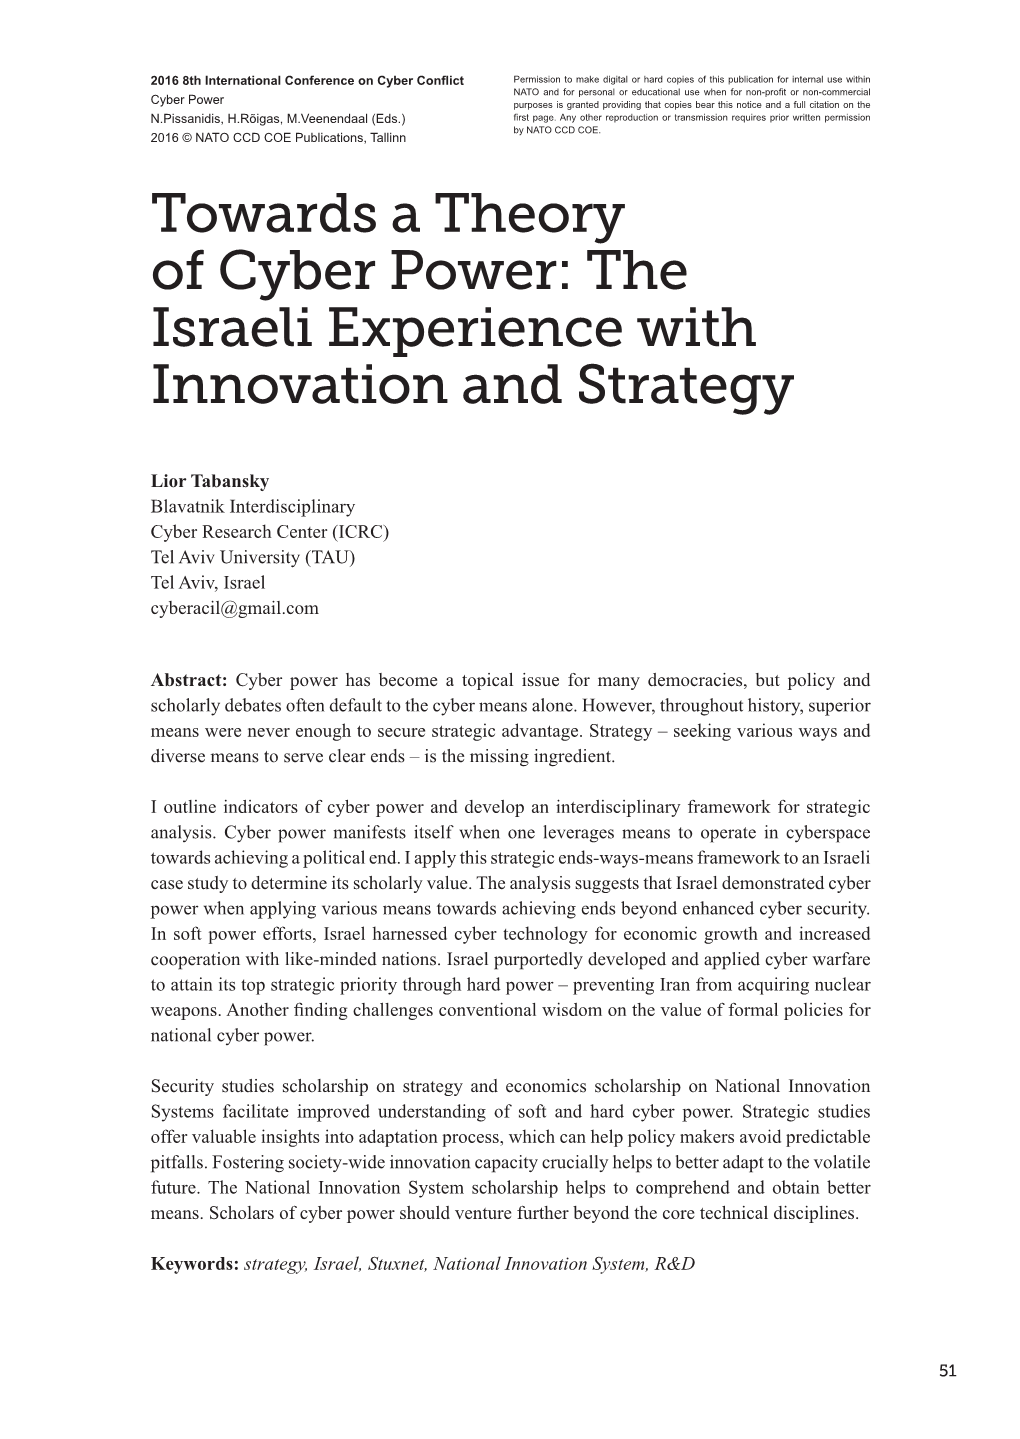 Towards a Theory of Cyber Power: the Israeli Experience with Innovation and Strategy